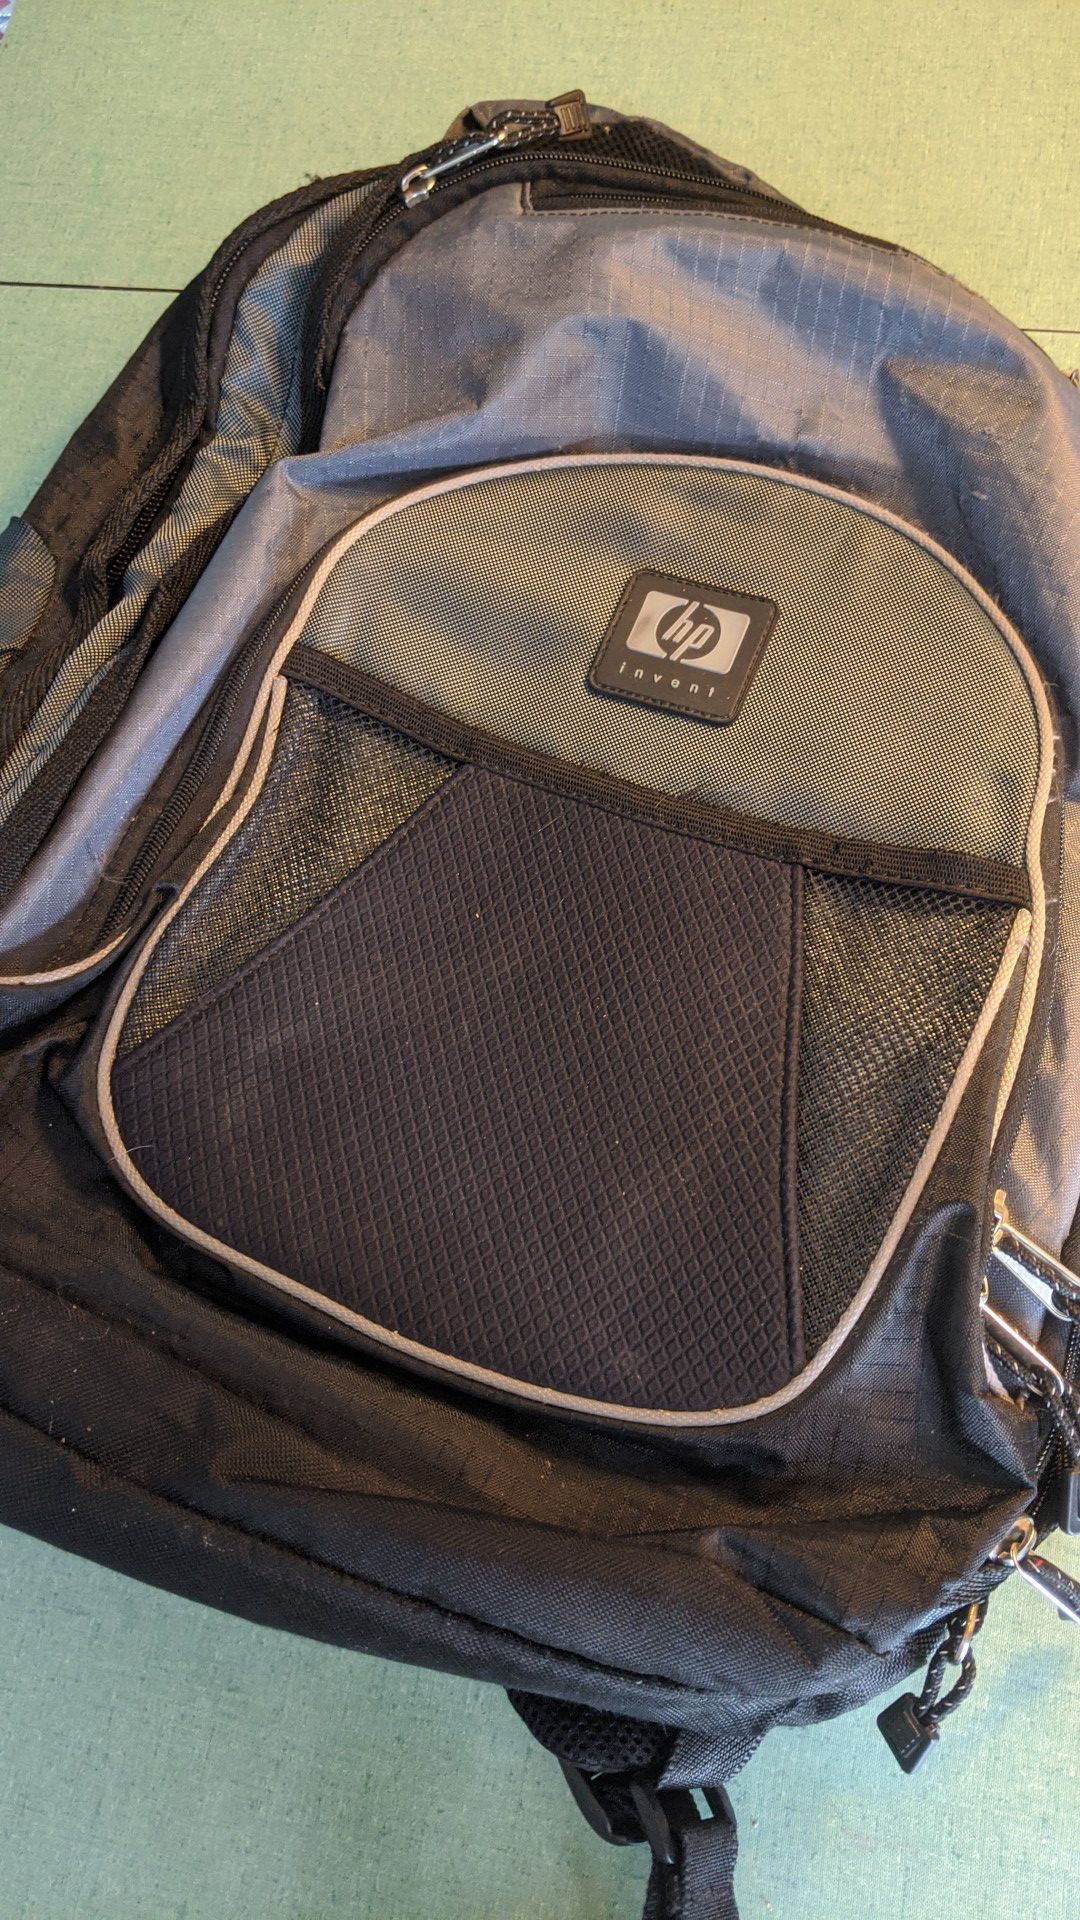 HP Computer backpack